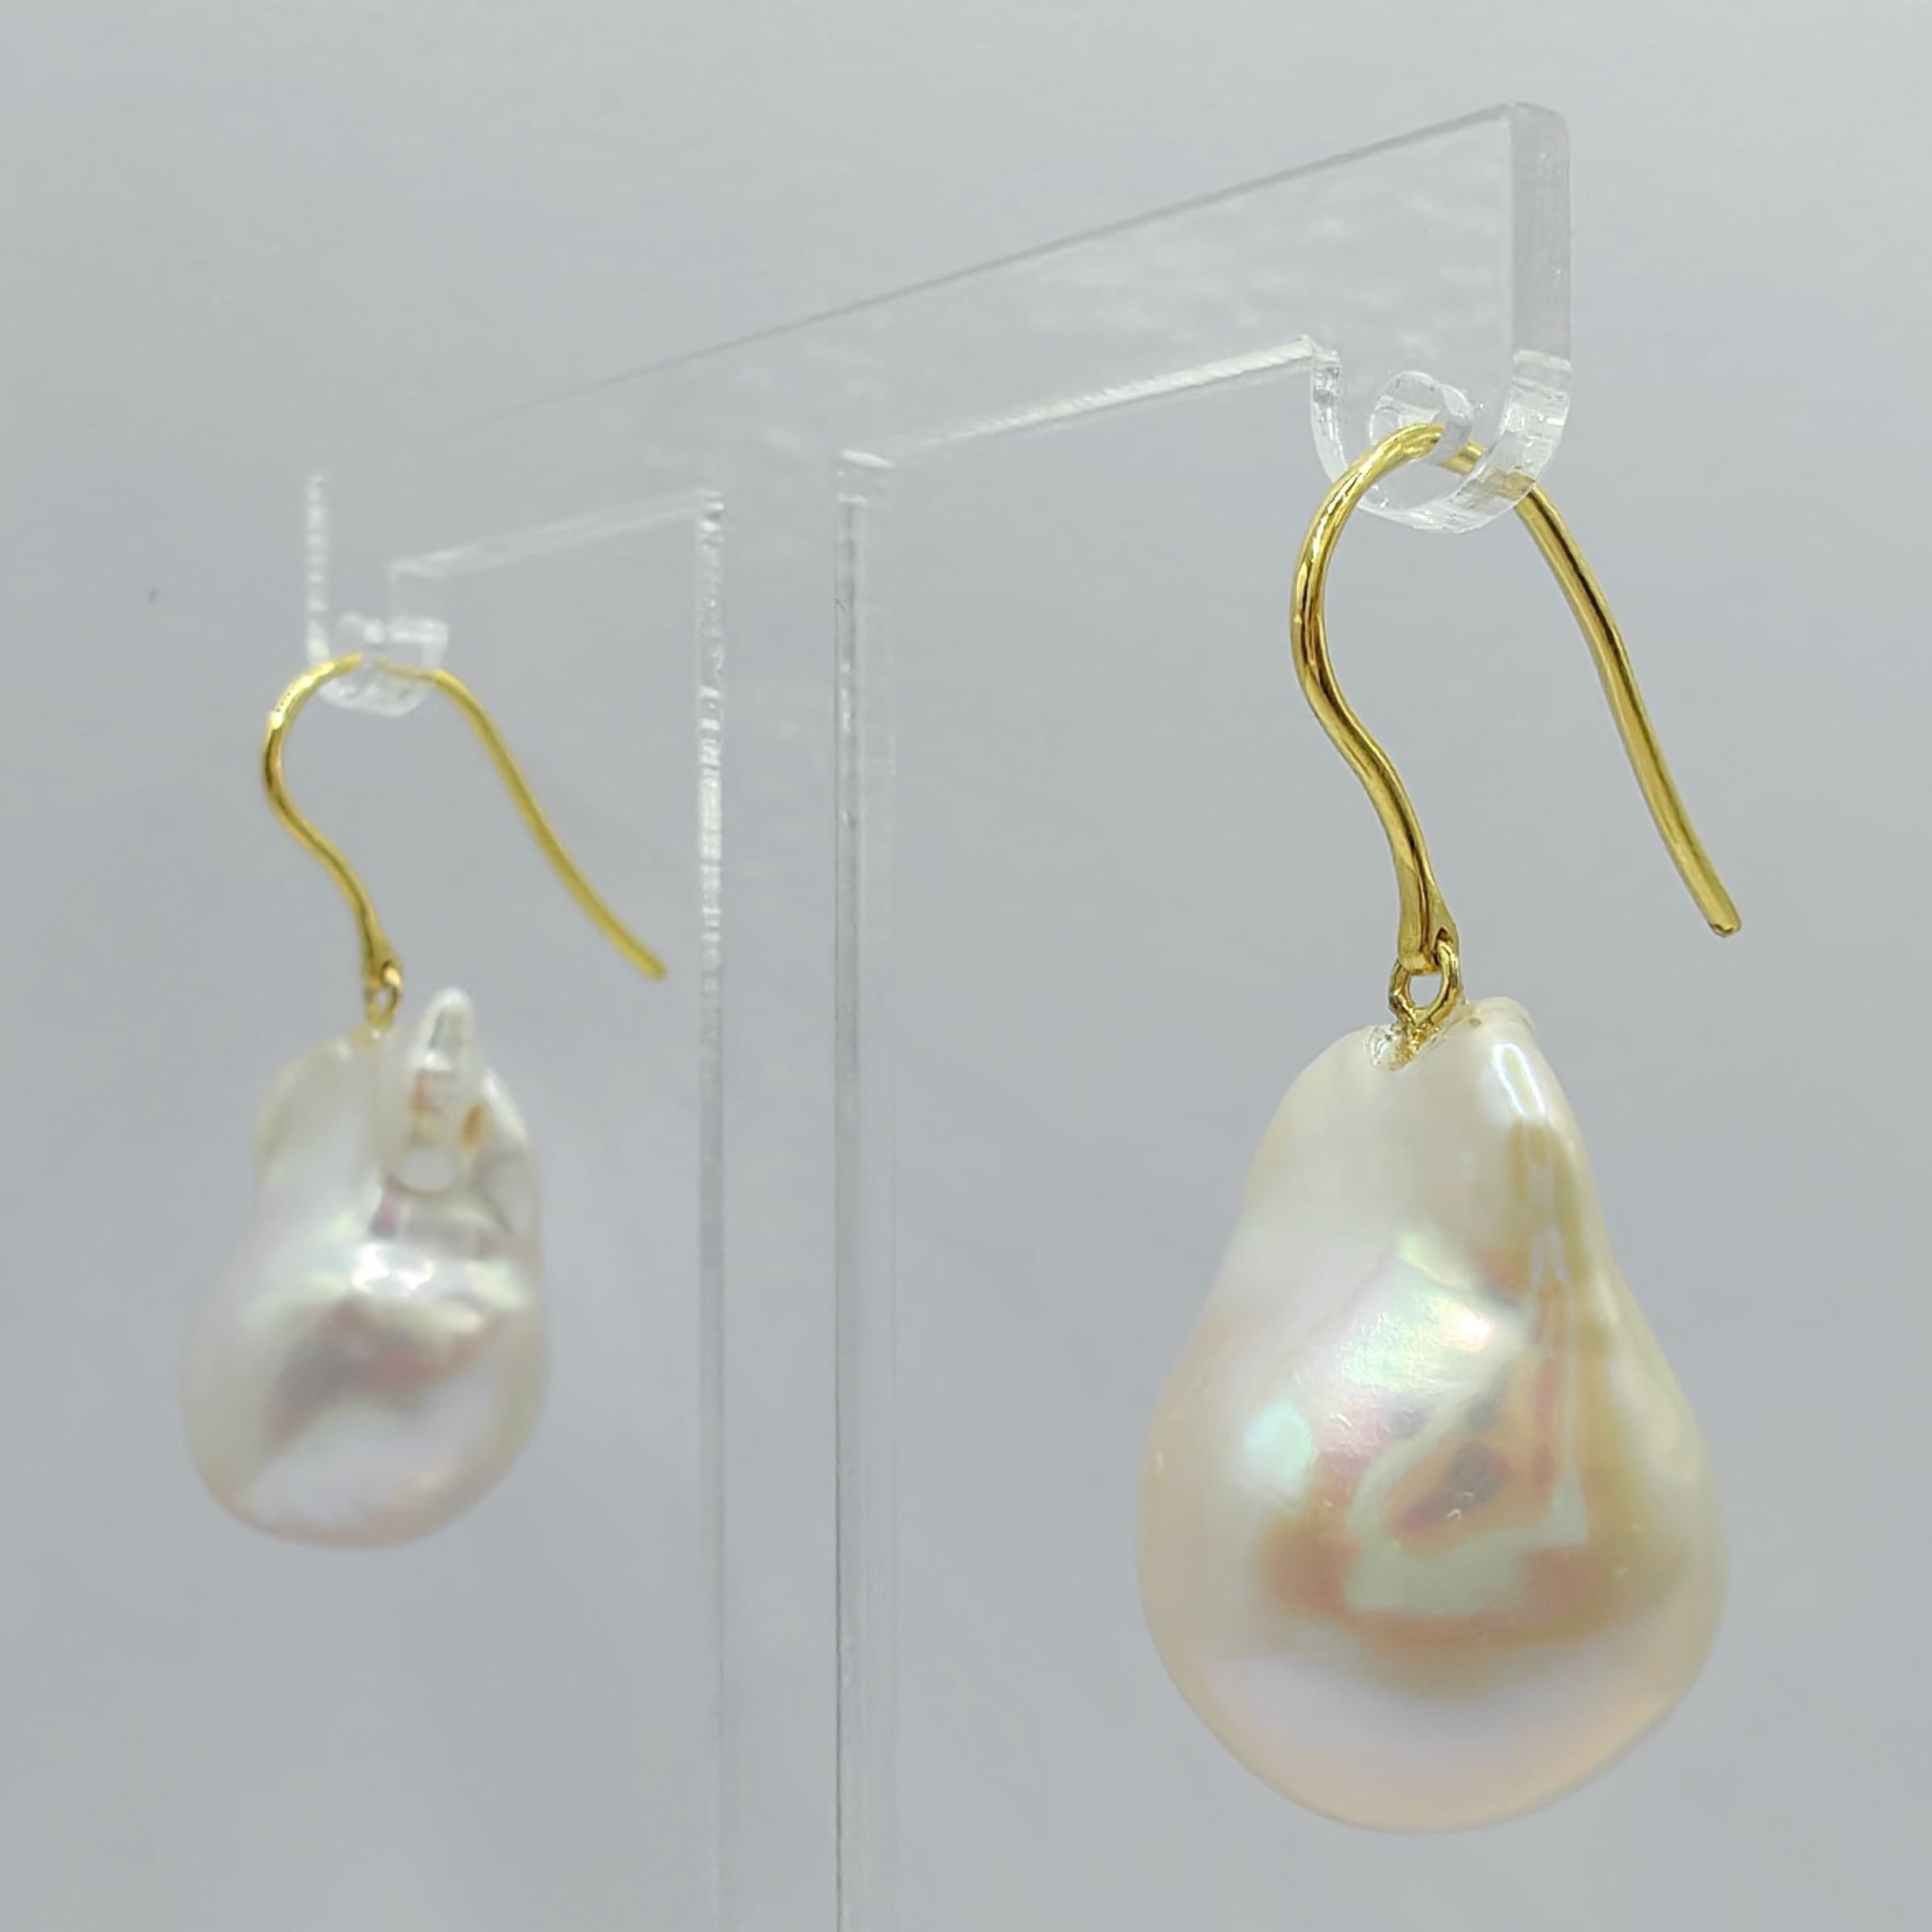 Contemporary Iridescent Baroque Pearl Drop Earrings With 18K Yellow Gold French Hooks